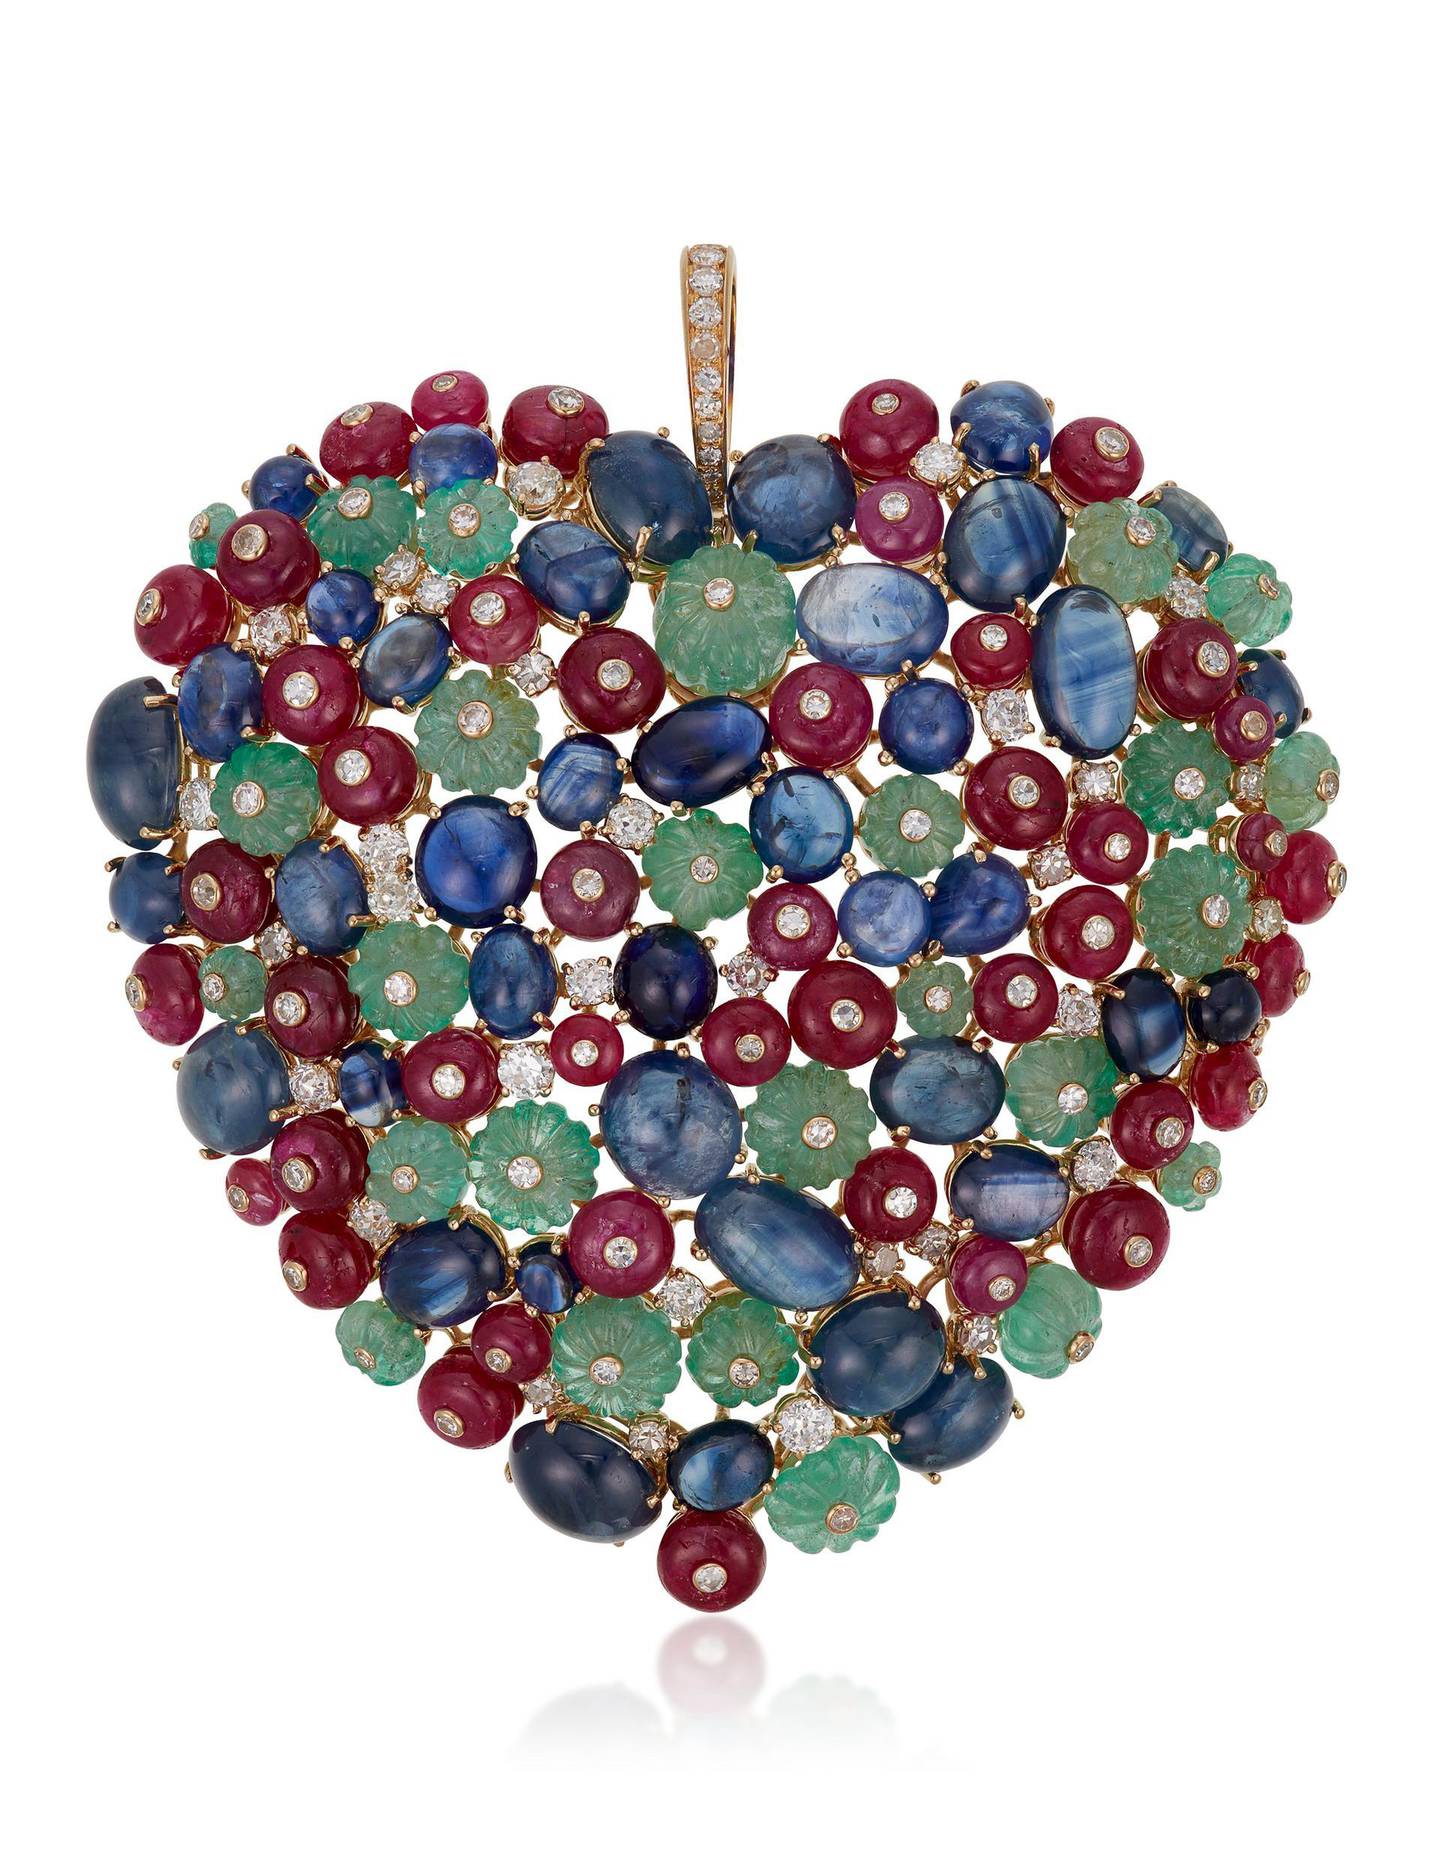 Heart-shaped pendant from the Colourful Whimsy: Jewels by Michele della Valle auction. Courtesy Christie's